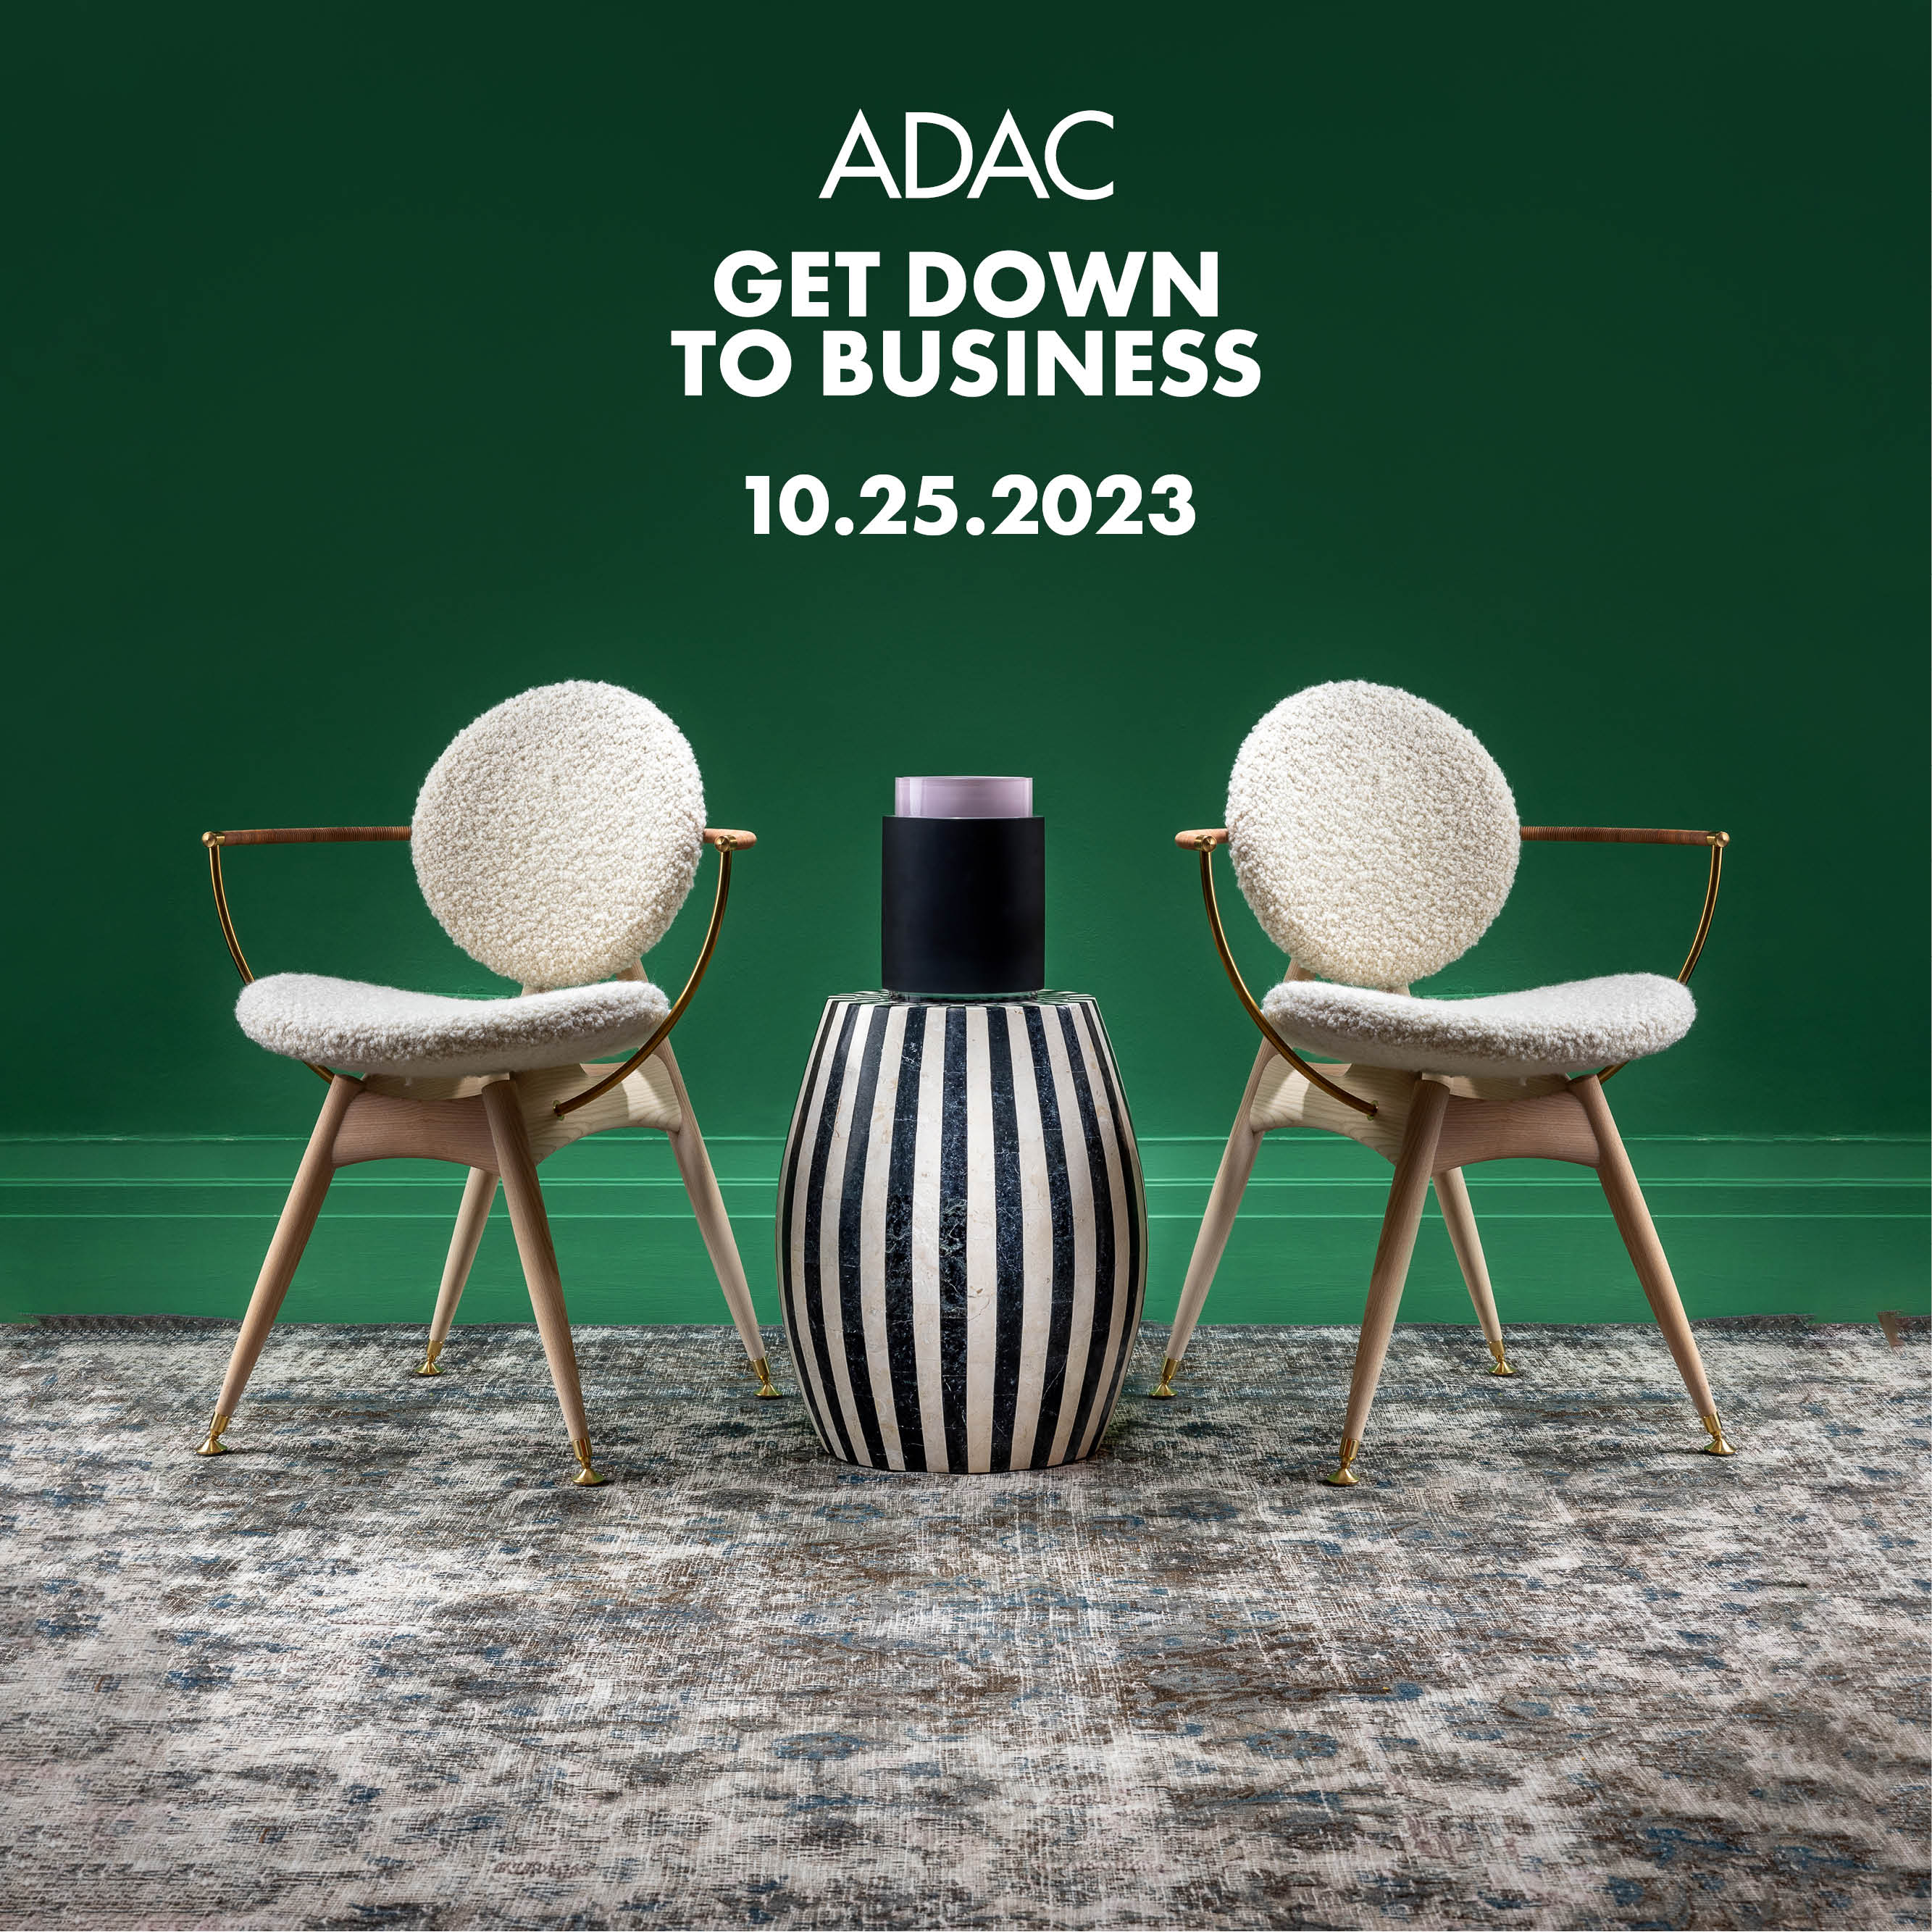 ADAC’s “Get Down to Business” sponsored by ASID and Business of Home, Fulton, Georgia, United States